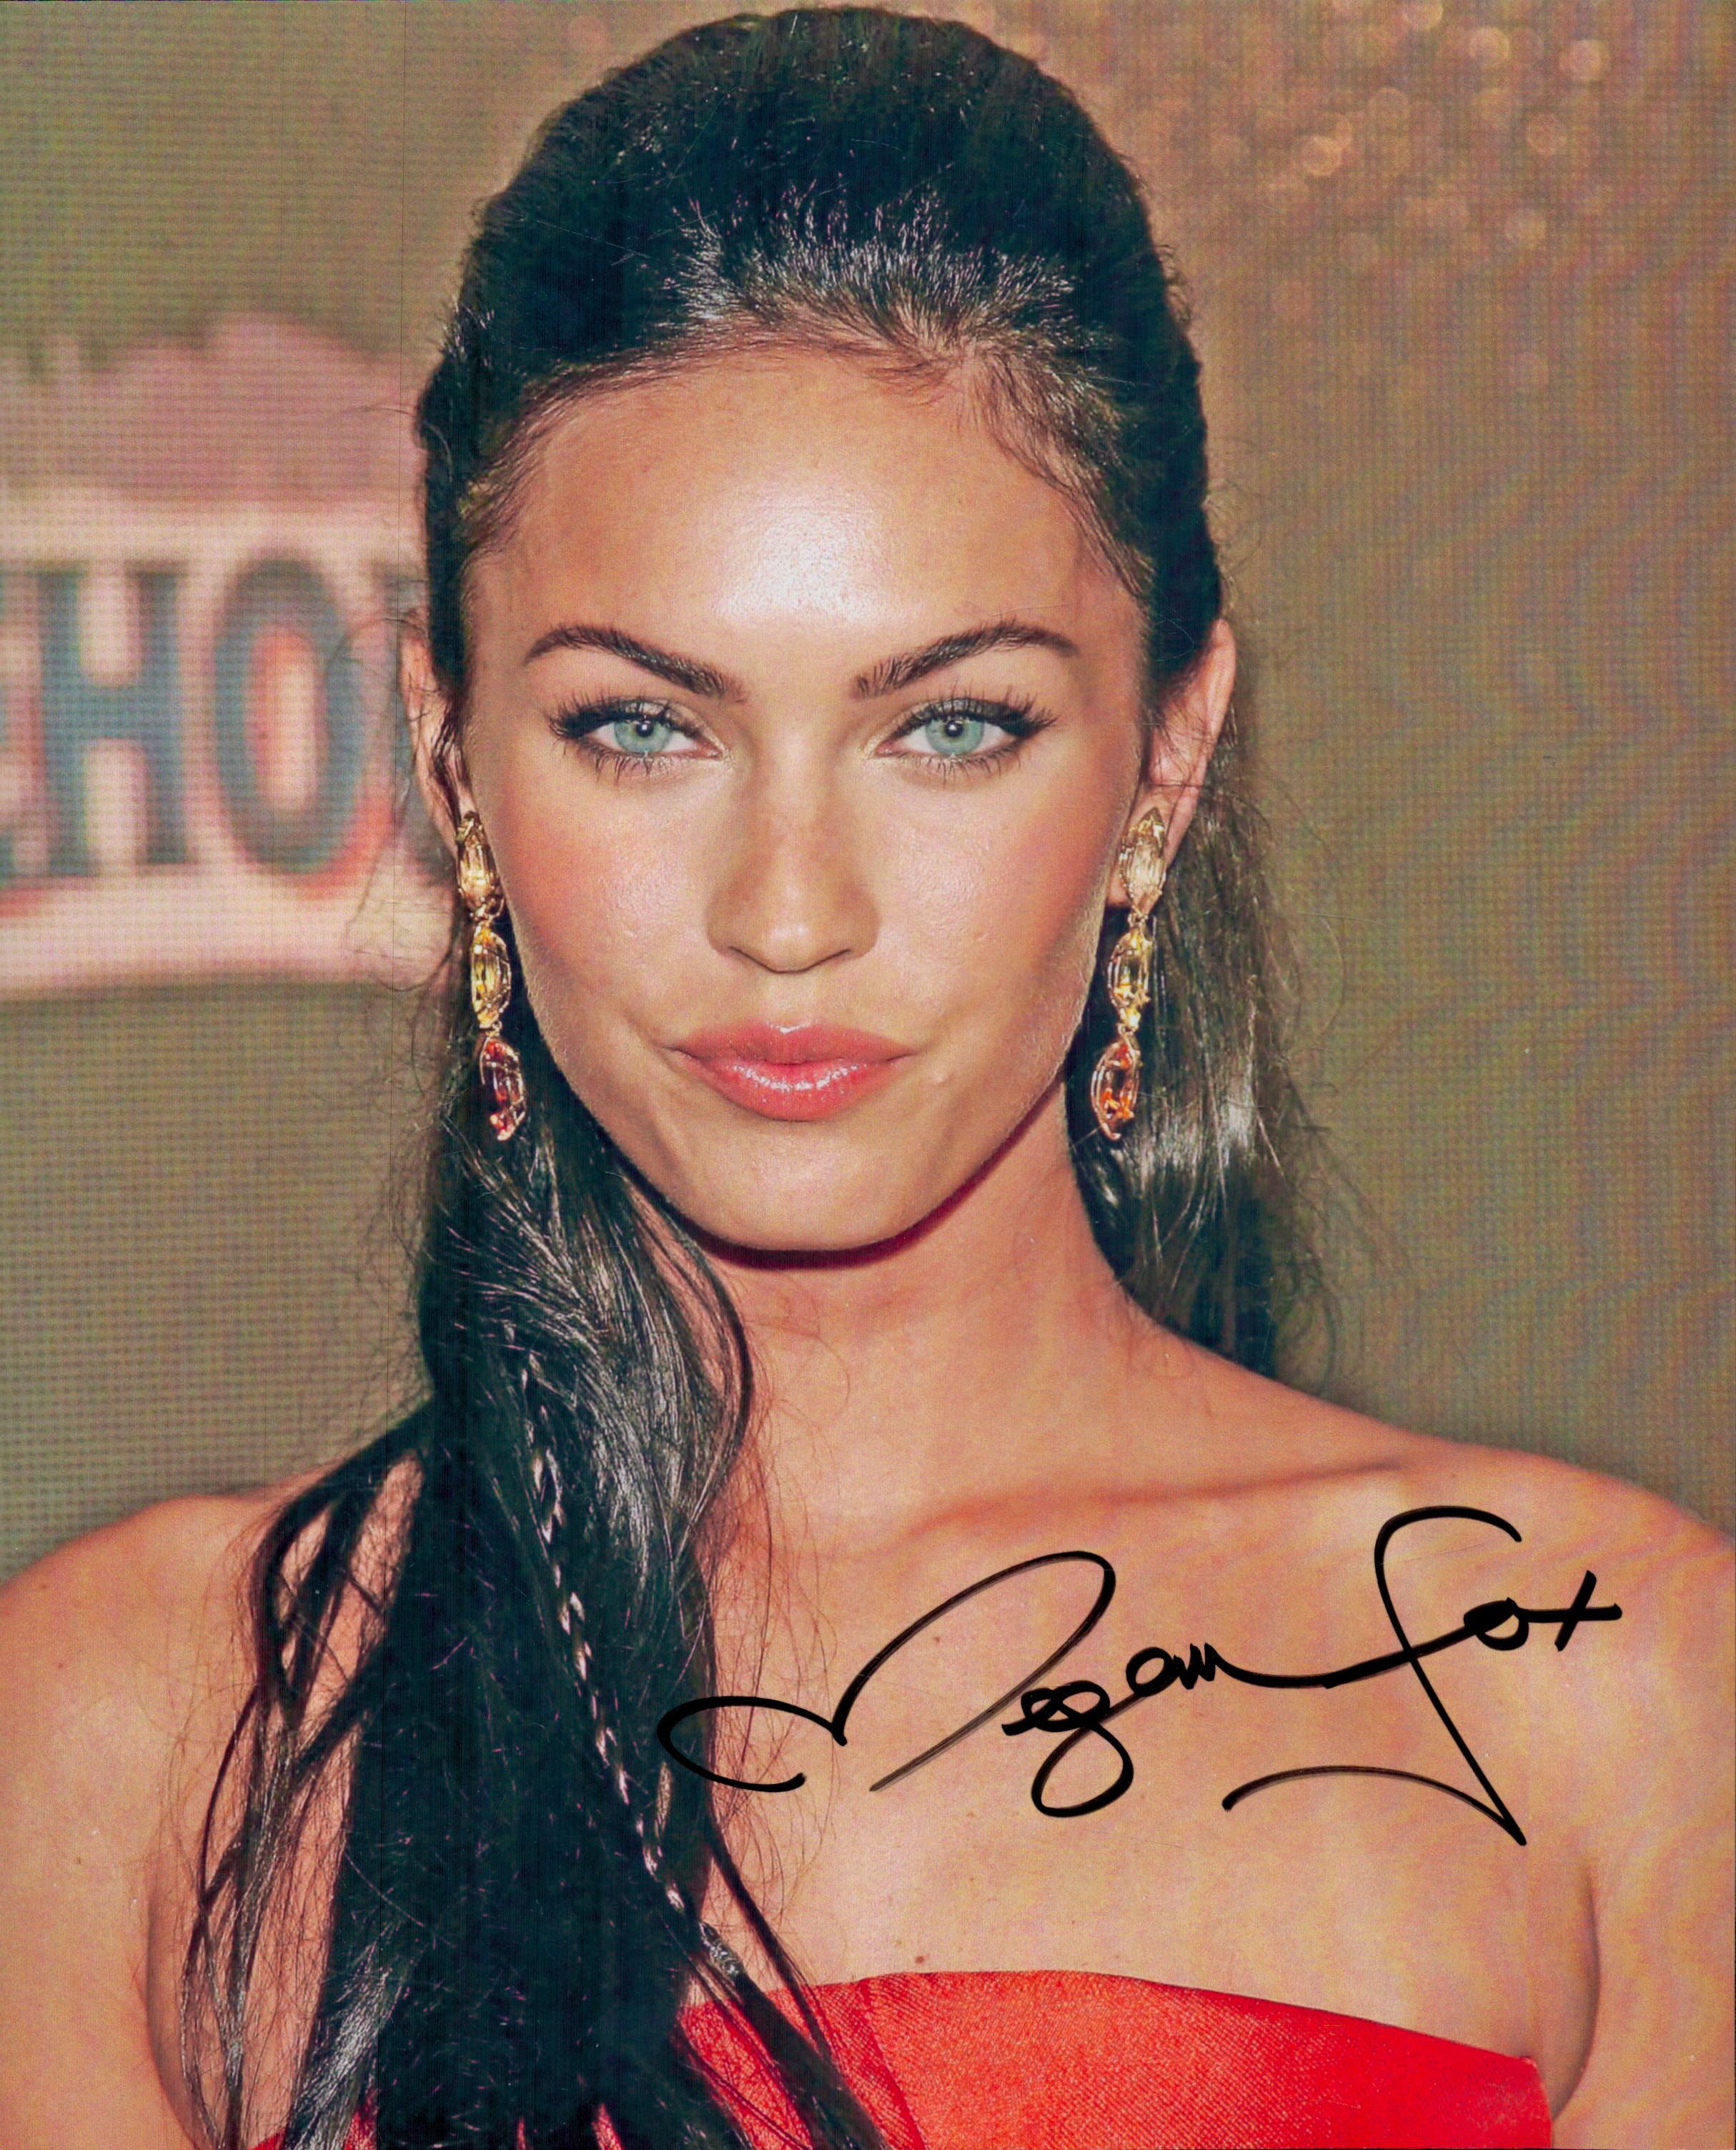 Megan Fox signed 10x8inch colour photo. Good Condition. All autographs come with a Certificate of